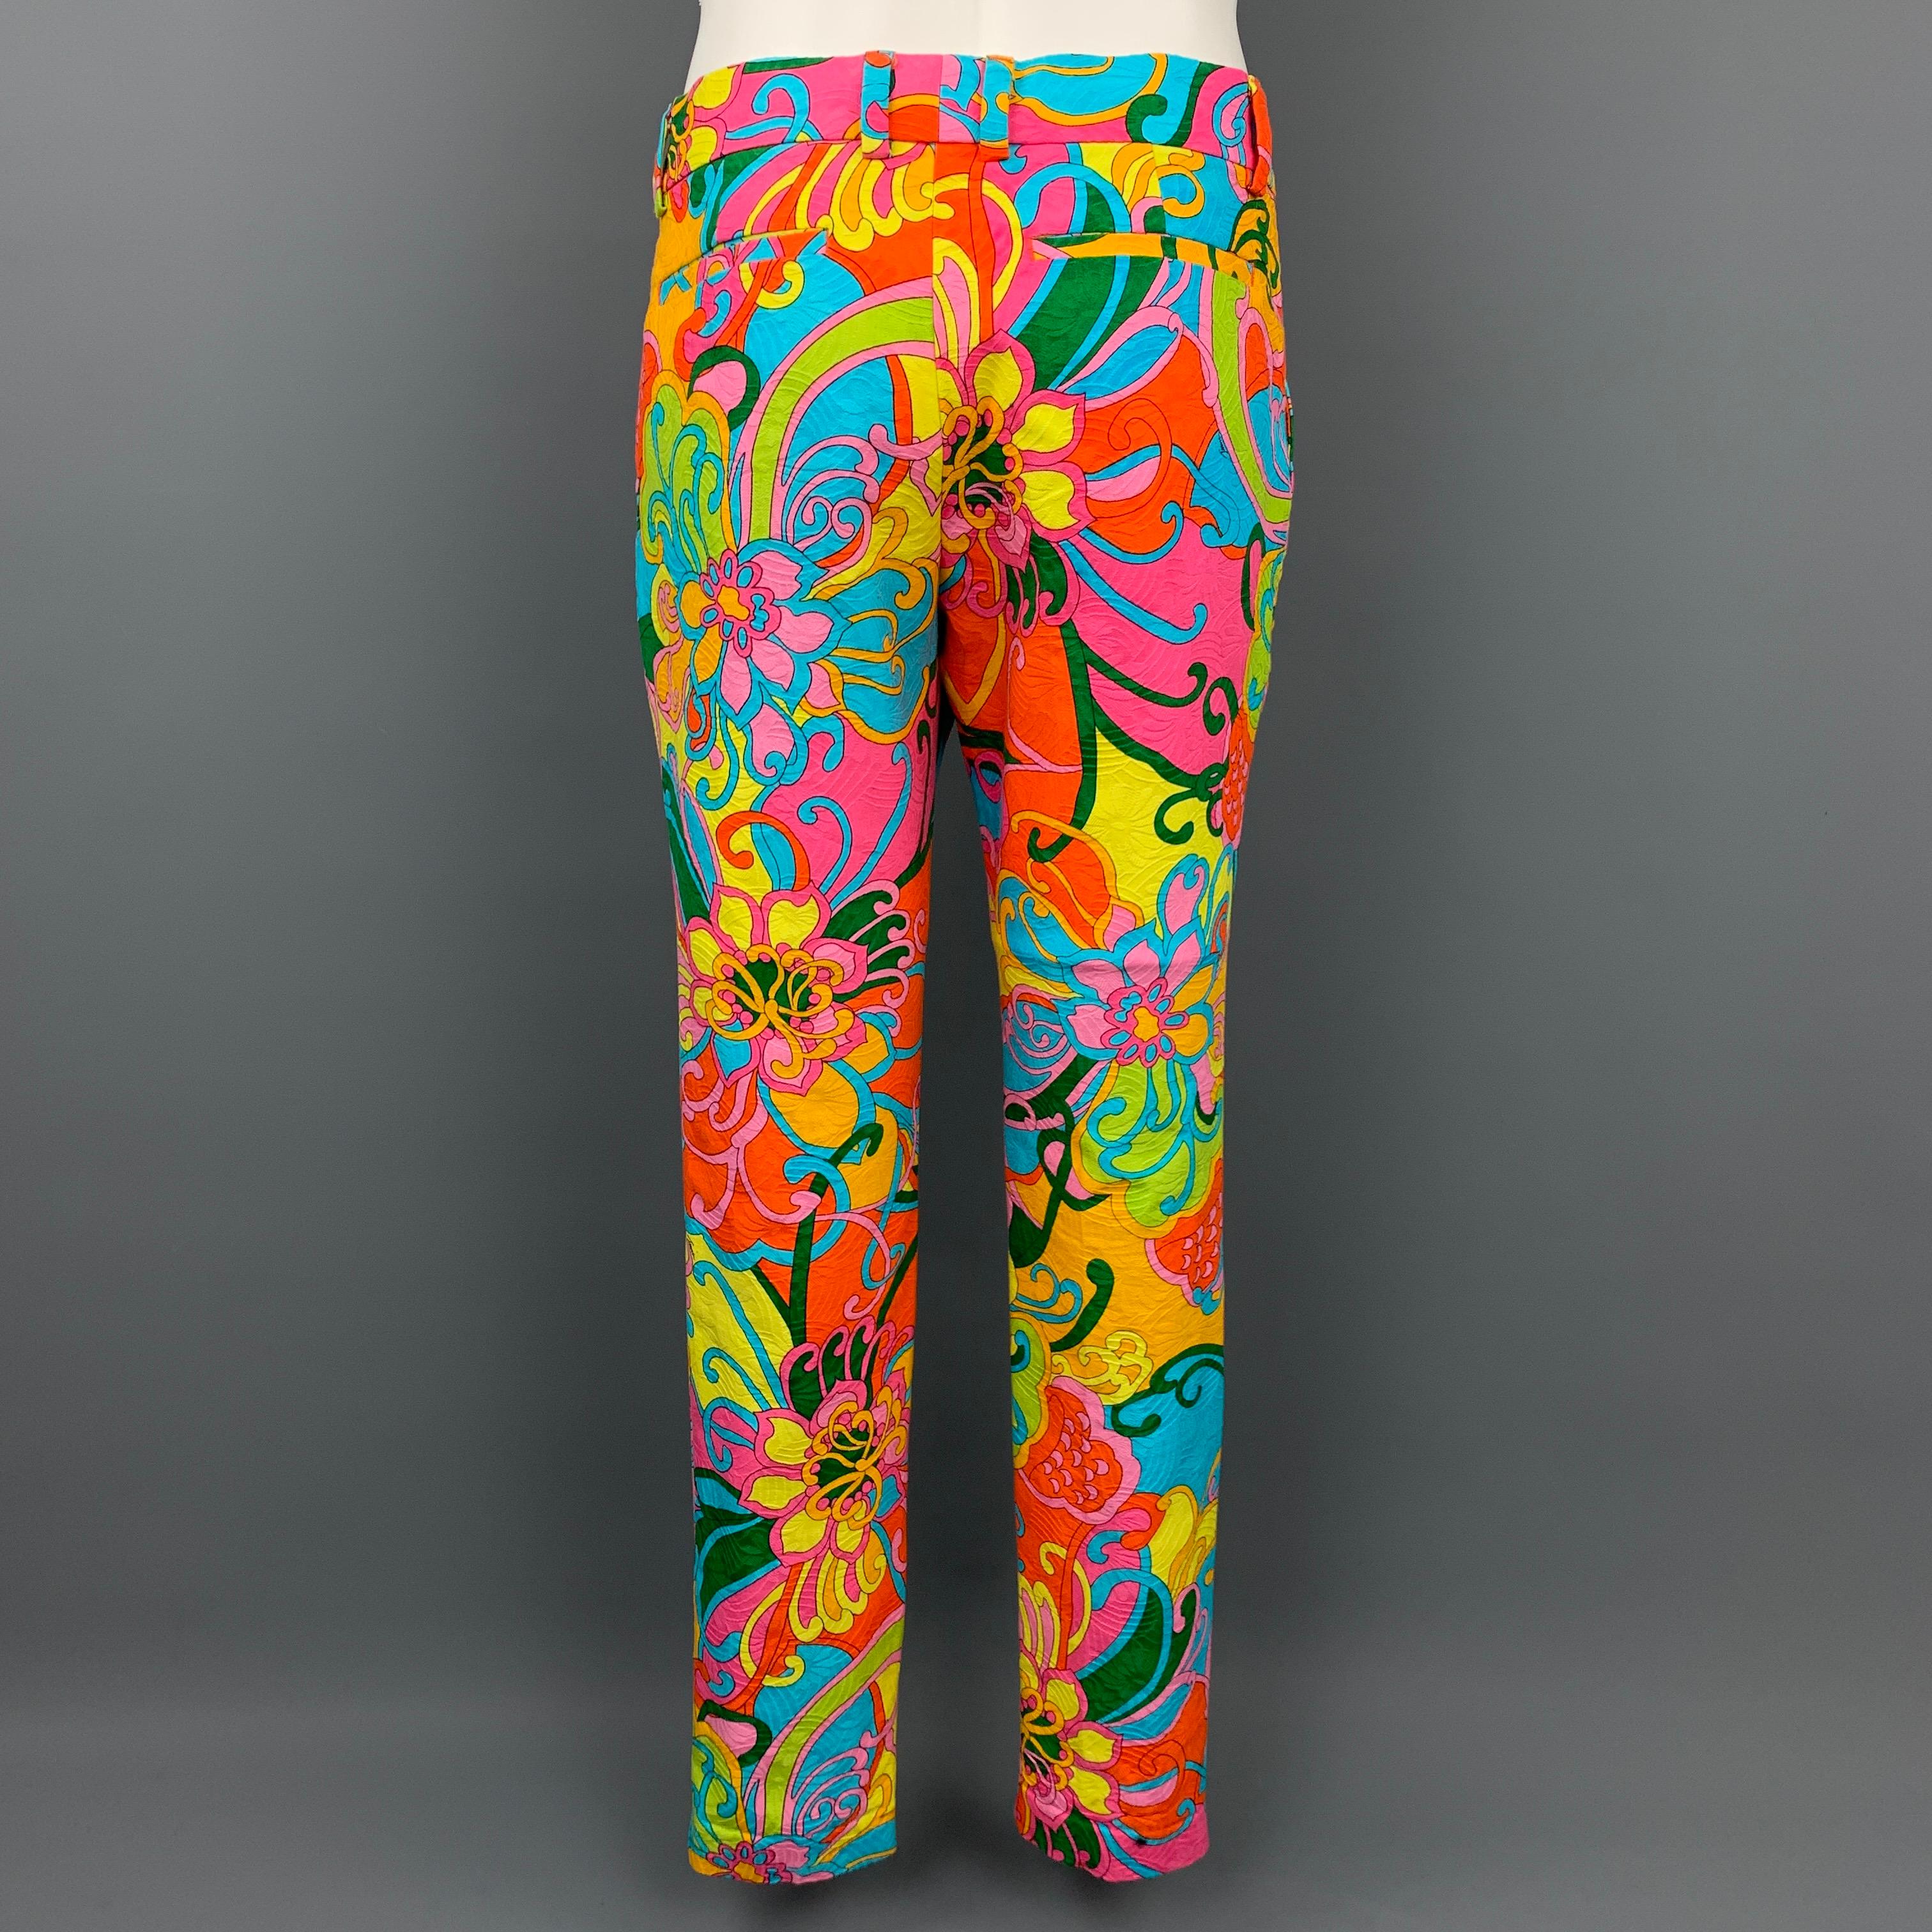 MR TURK casual pants comes in a multi-color print cotton featuring a slim fit, front tab, and a zip fly closure. Made in USA.

Excellent Pre-Owned Condition.
Marked: 30

Measurements:

Waist: 32 in.
Rise: 9.5 in.
Inseam: 31 in. 